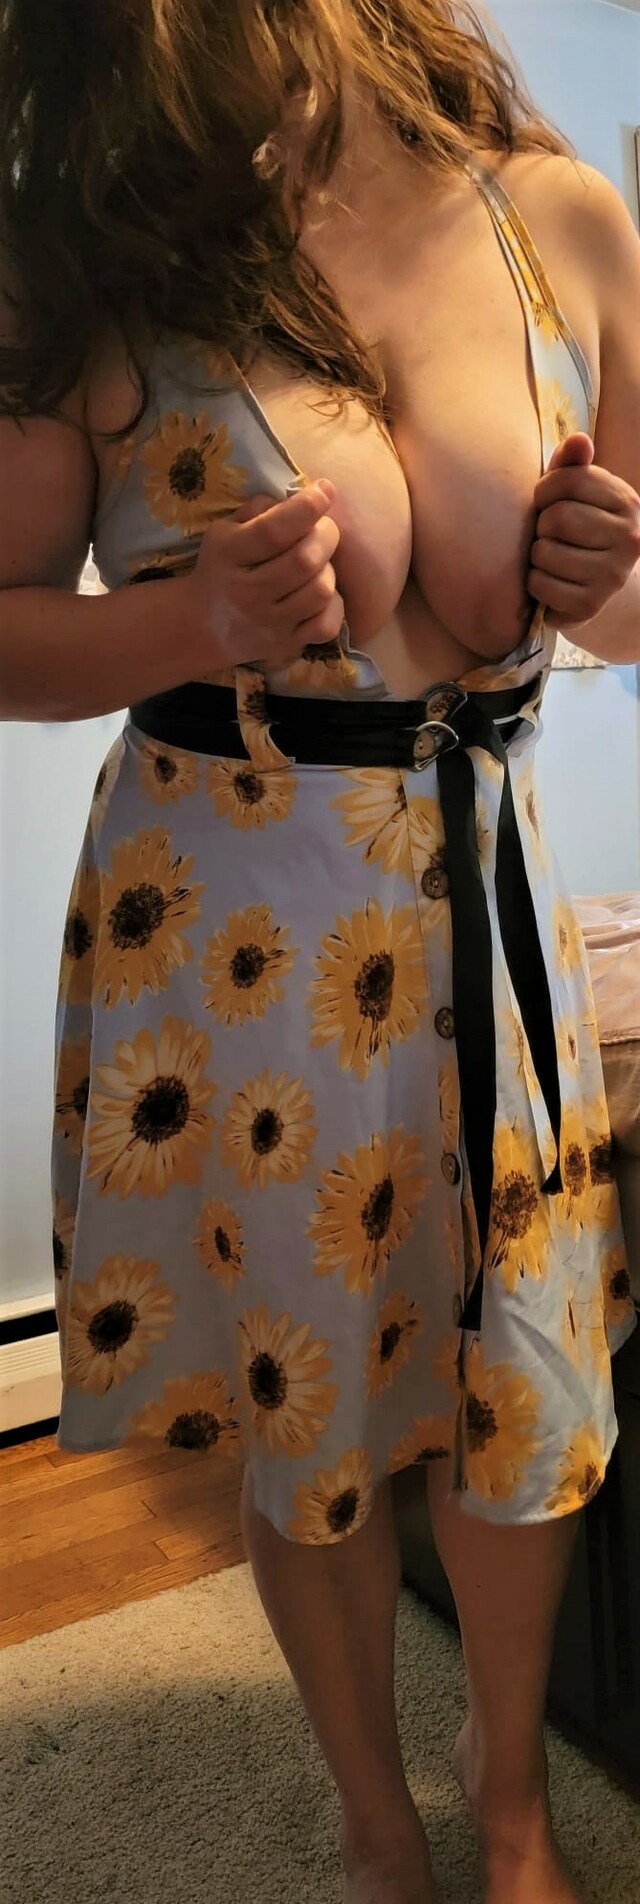 Sundresses are too sheer to hold these [f]unbags back. free nude pictures